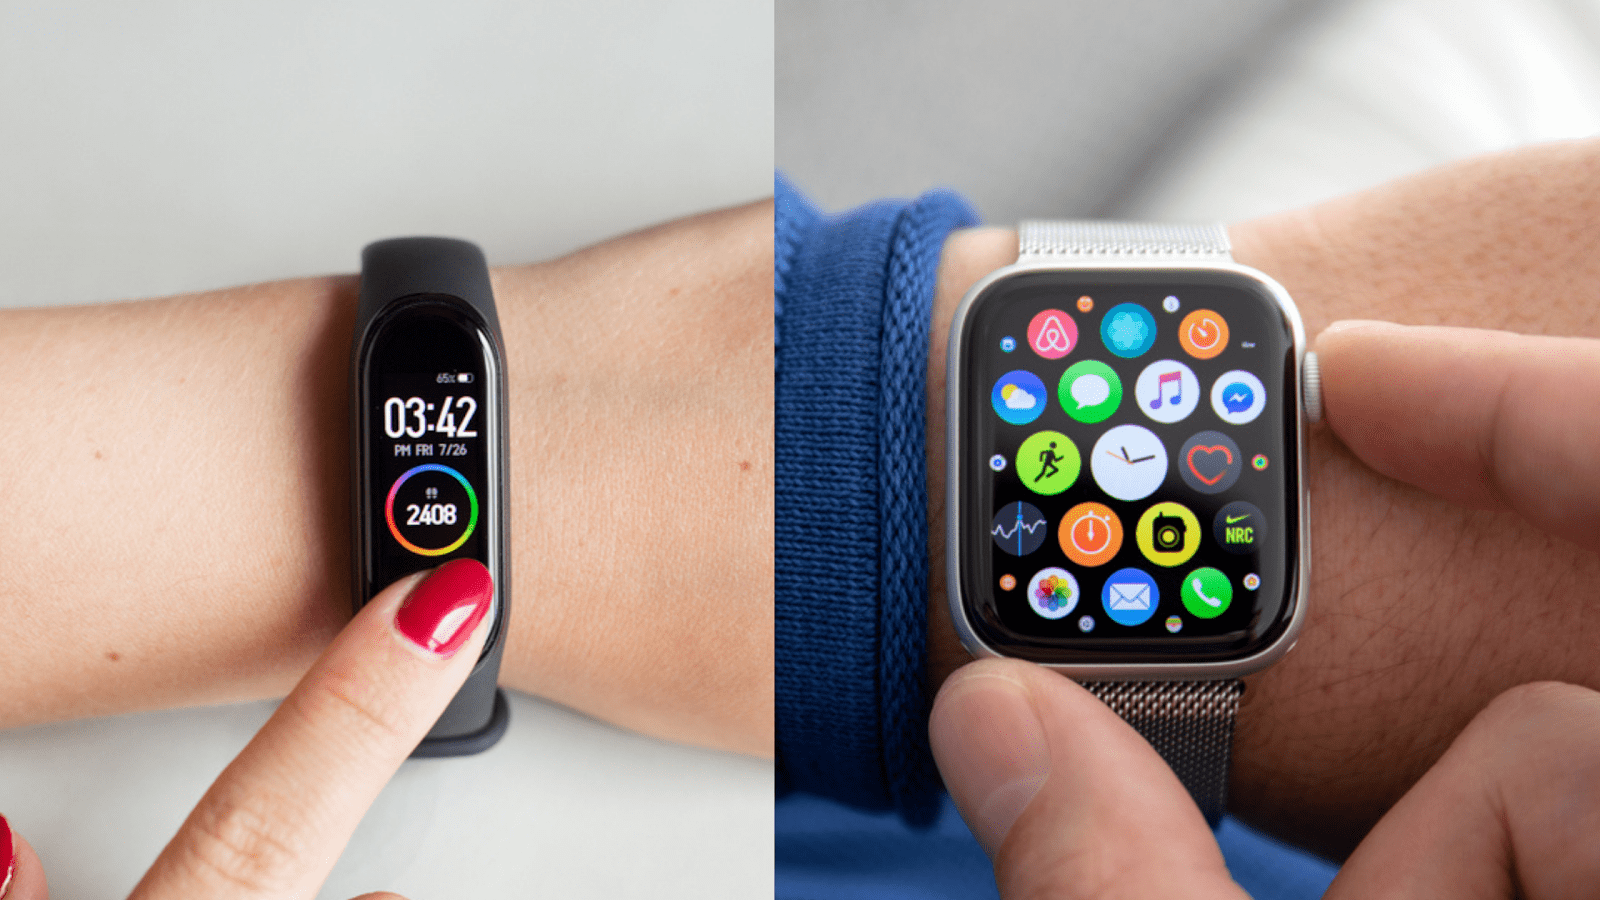 Mi Band vs. Apple Watch, should you spend big on smartwatches? | Thematic